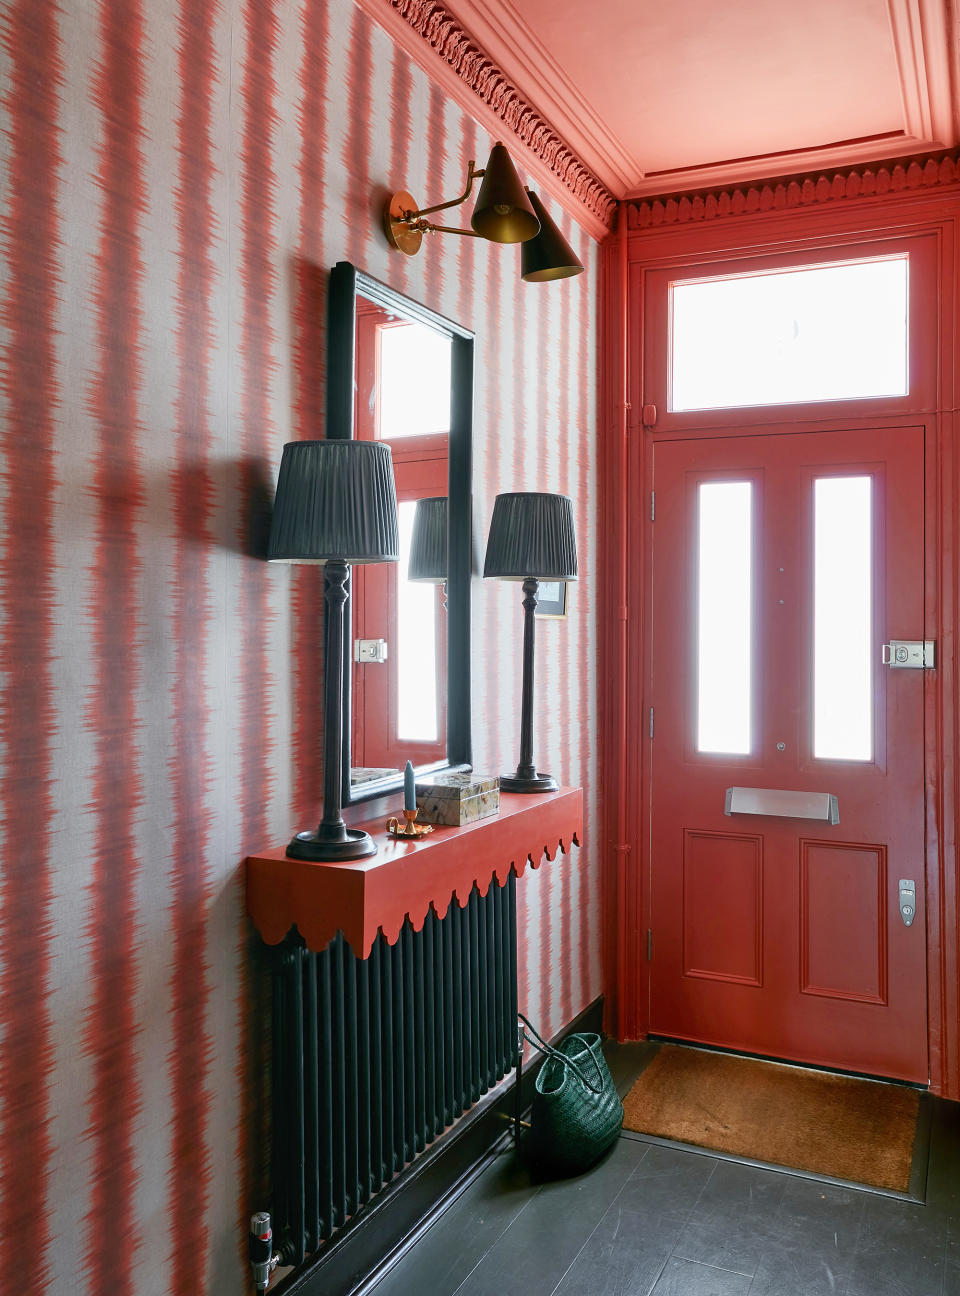 <p> &#x2018;The easiest way to make an impression in this previously dingy or small hallway was to add bold wallpaper,&#x2019; says interior decorator Laura Stephens. &#x2018;The cornice was very detailed and adding this flame red paint enhances it and works well with the stripe in the wallpaper.&#x2019; </p> <p> Interior designer Nina Campbell agrees: &apos;Decorating a hall is a lot of fun. It is a small space so you can be as wild as you like. I like to treat it like an exquisite jewelry box and paint the walls a wonderful color or put up a pretty hallway wallpaper.&apos; </p>